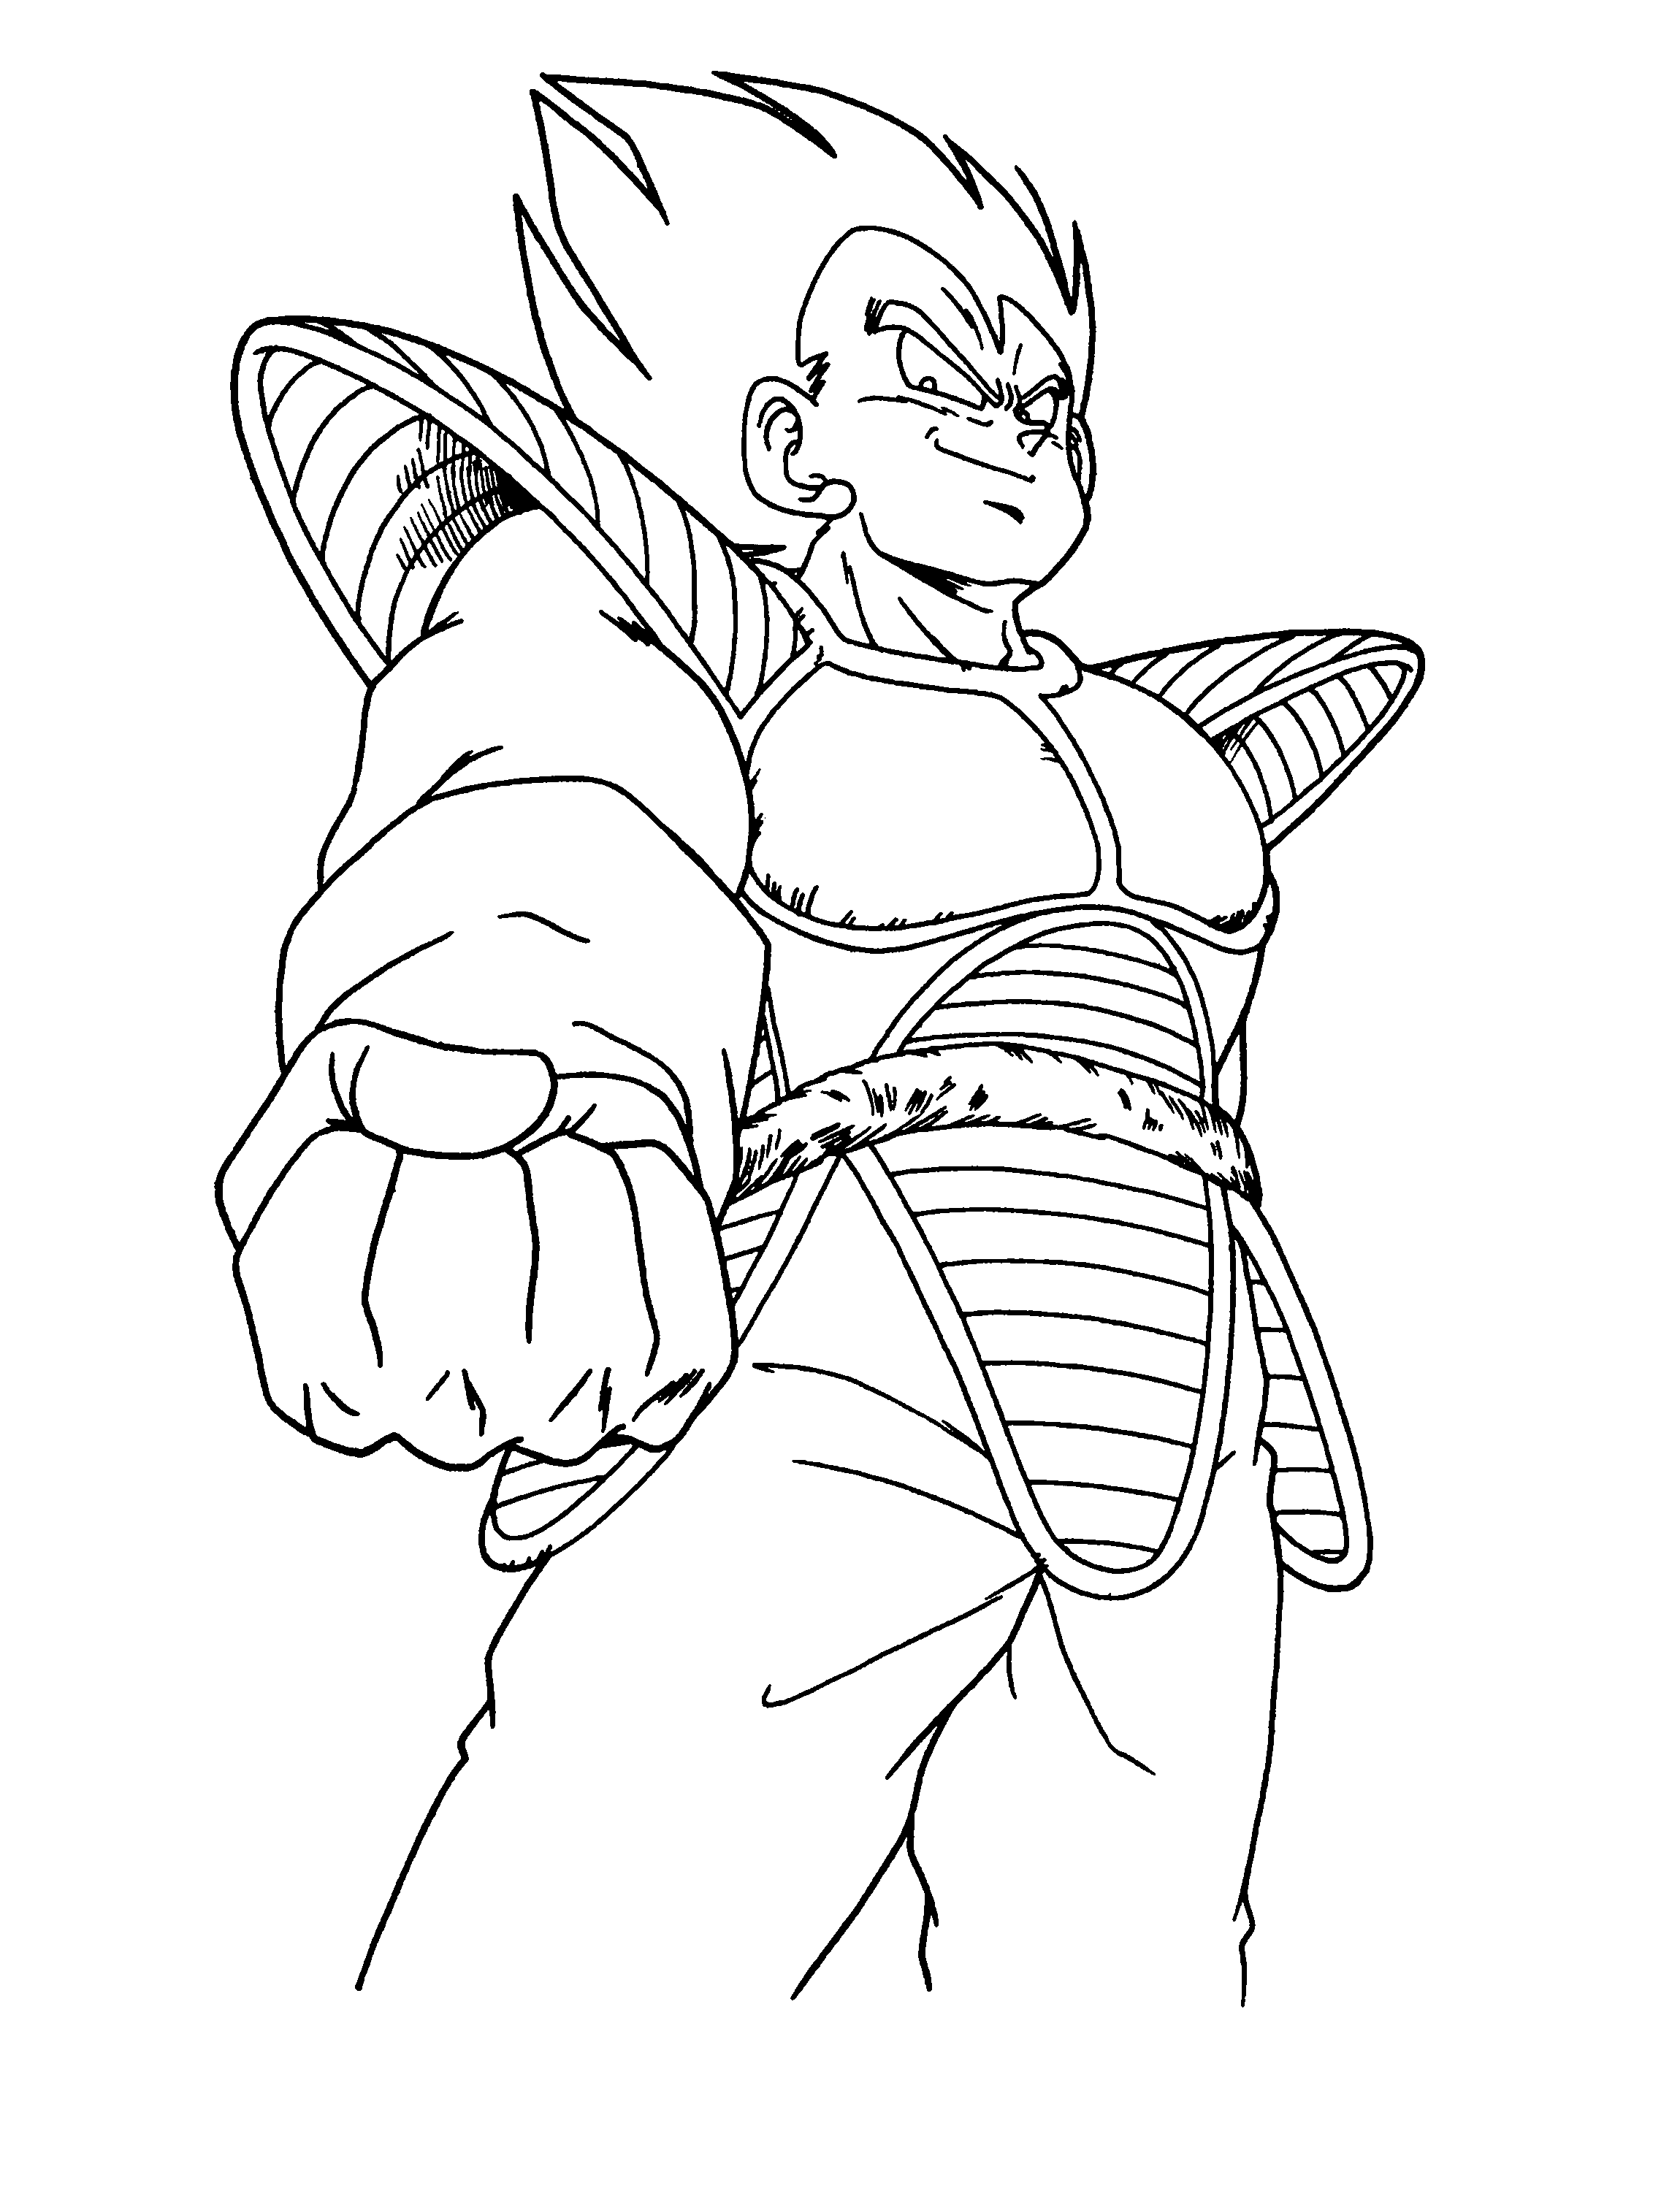 dbz free coloring pages - photo #24